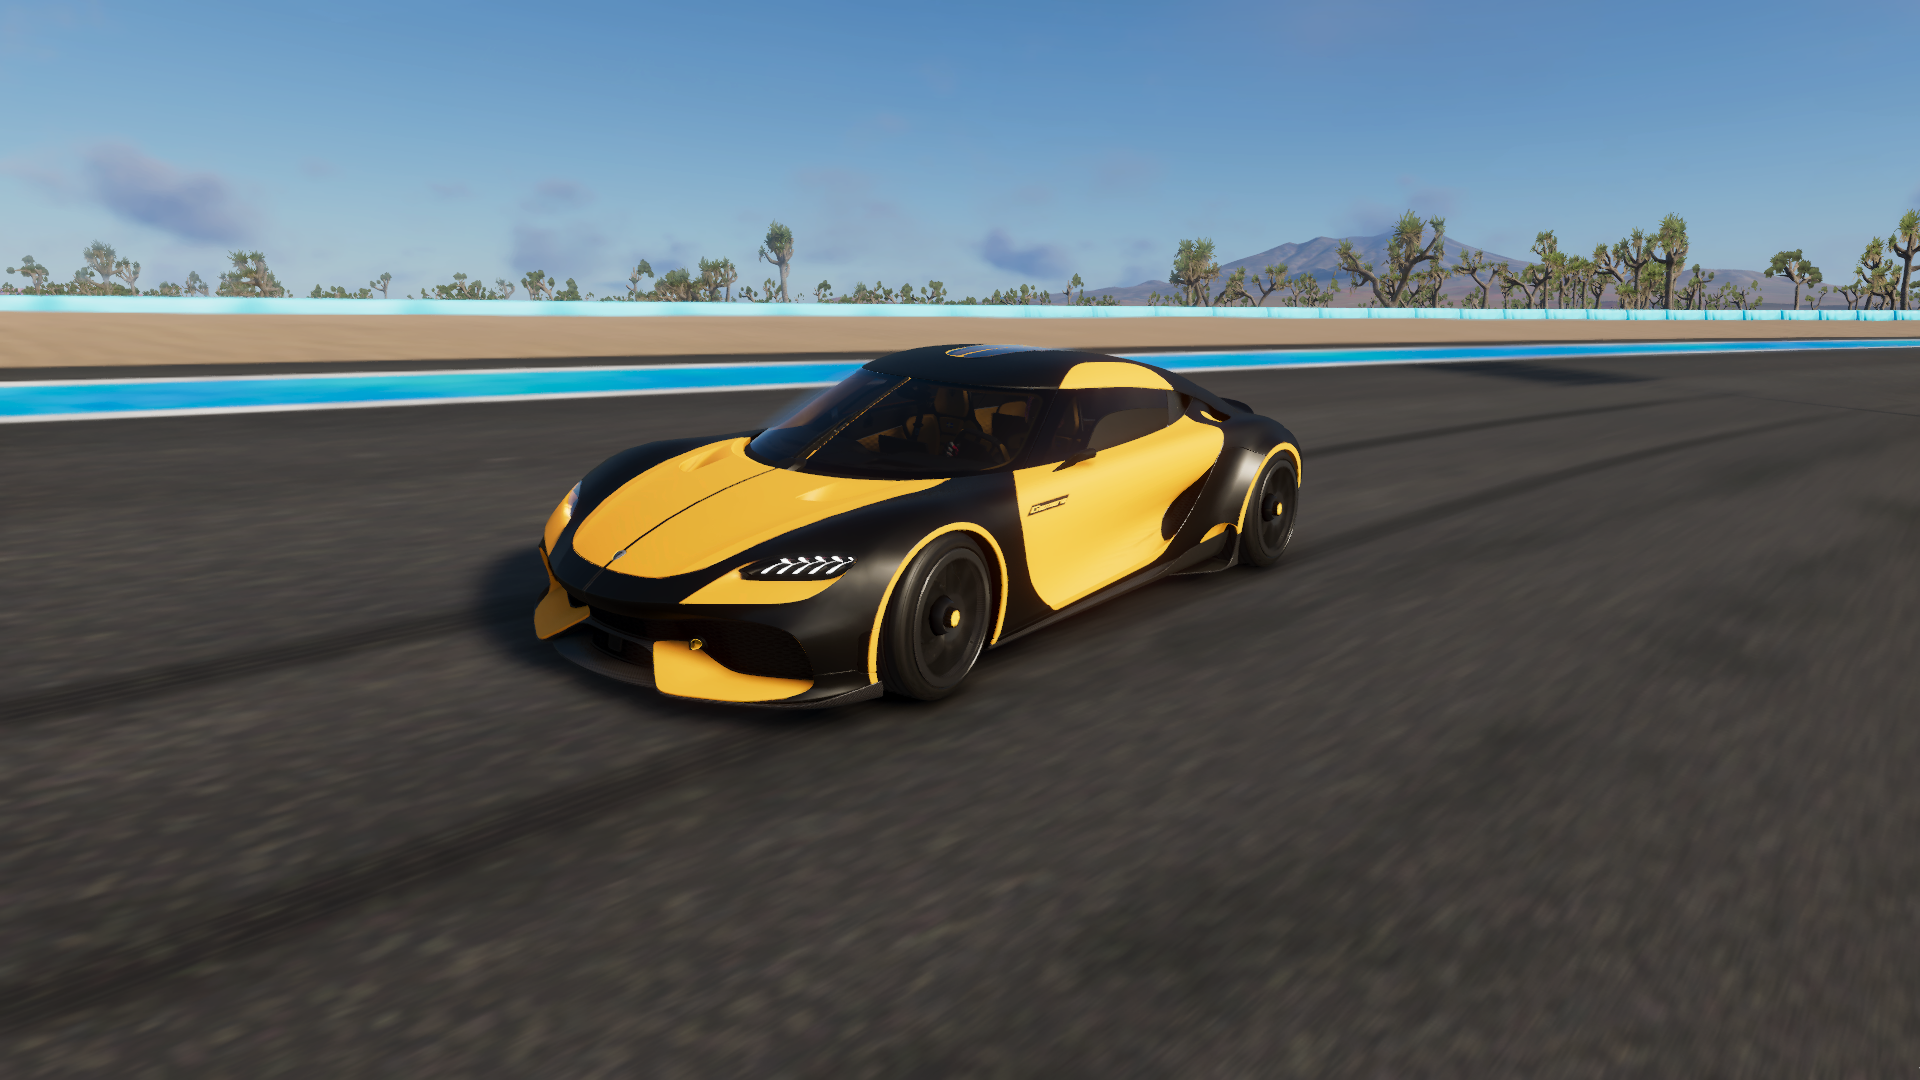 TheCrew2_2021_07_05_01_39_31_255.png